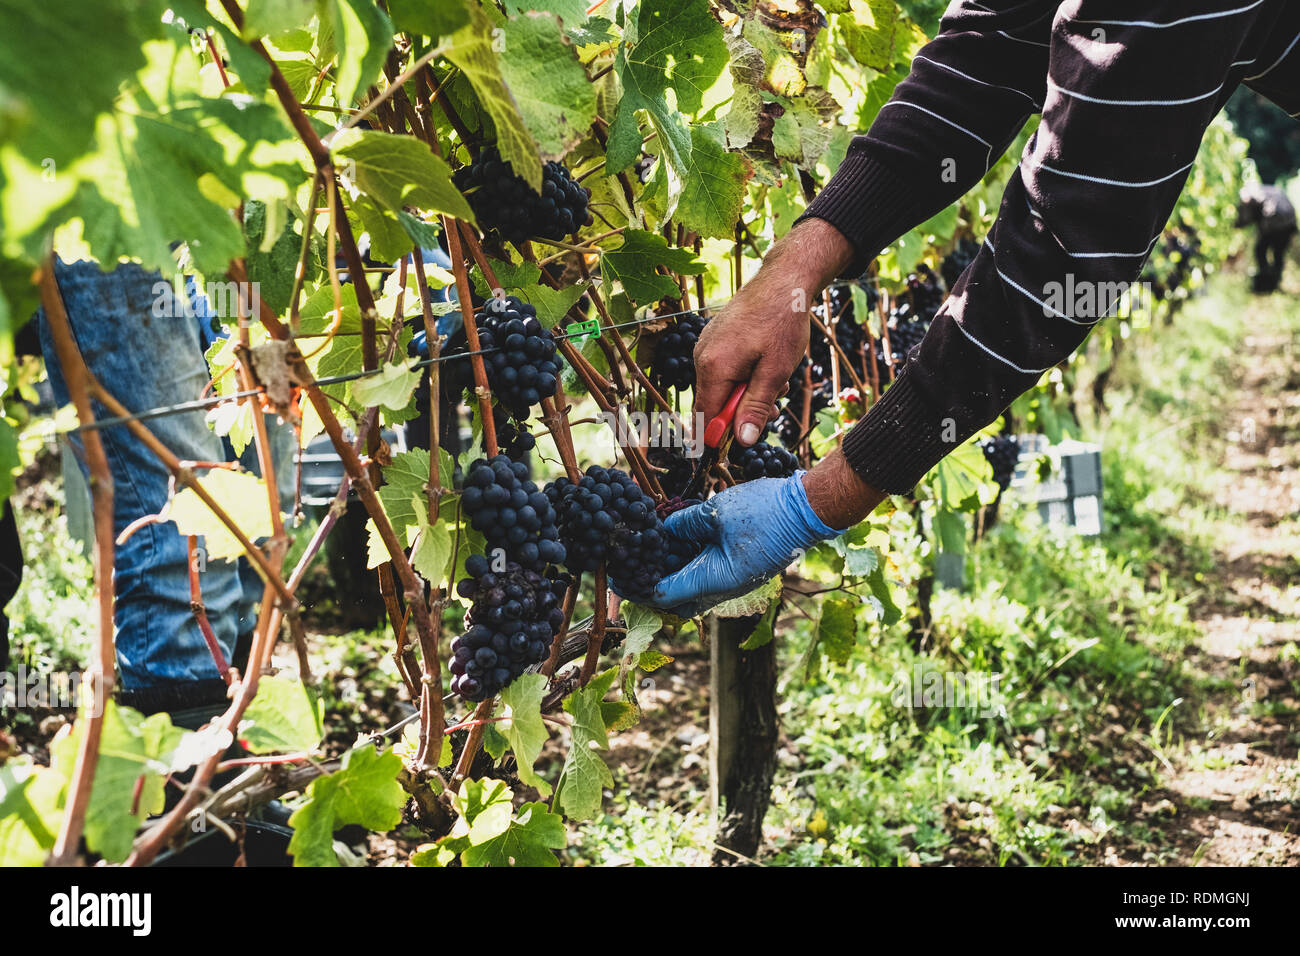 Man standing in a vineyard, harvesting bunches of black grapes. Stock Photo